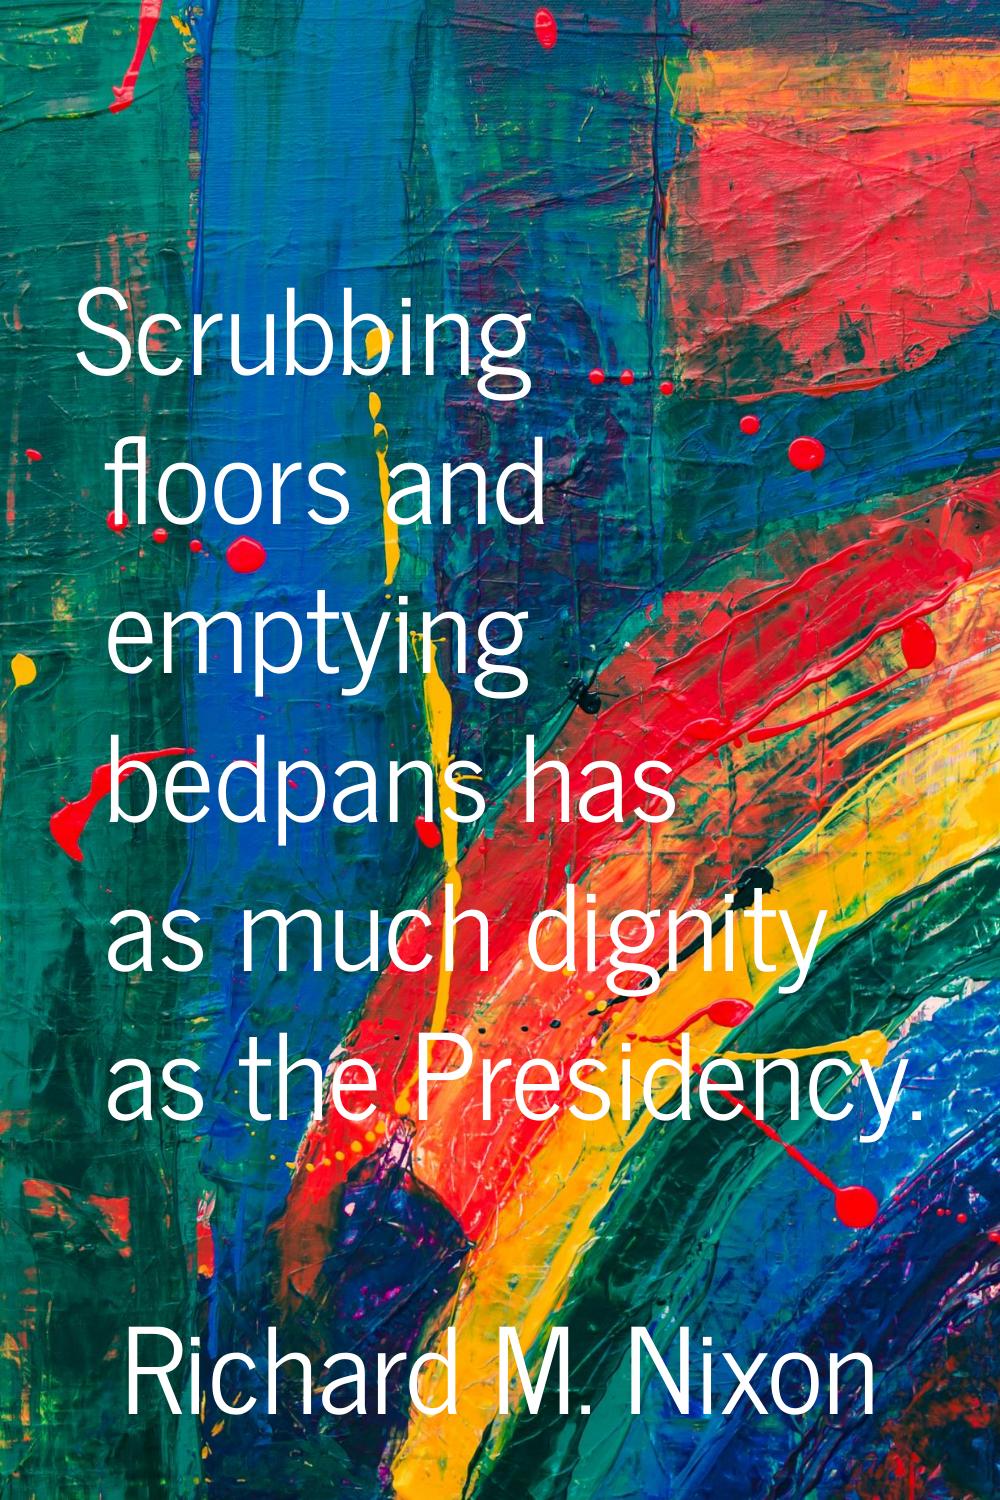 Scrubbing floors and emptying bedpans has as much dignity as the Presidency.